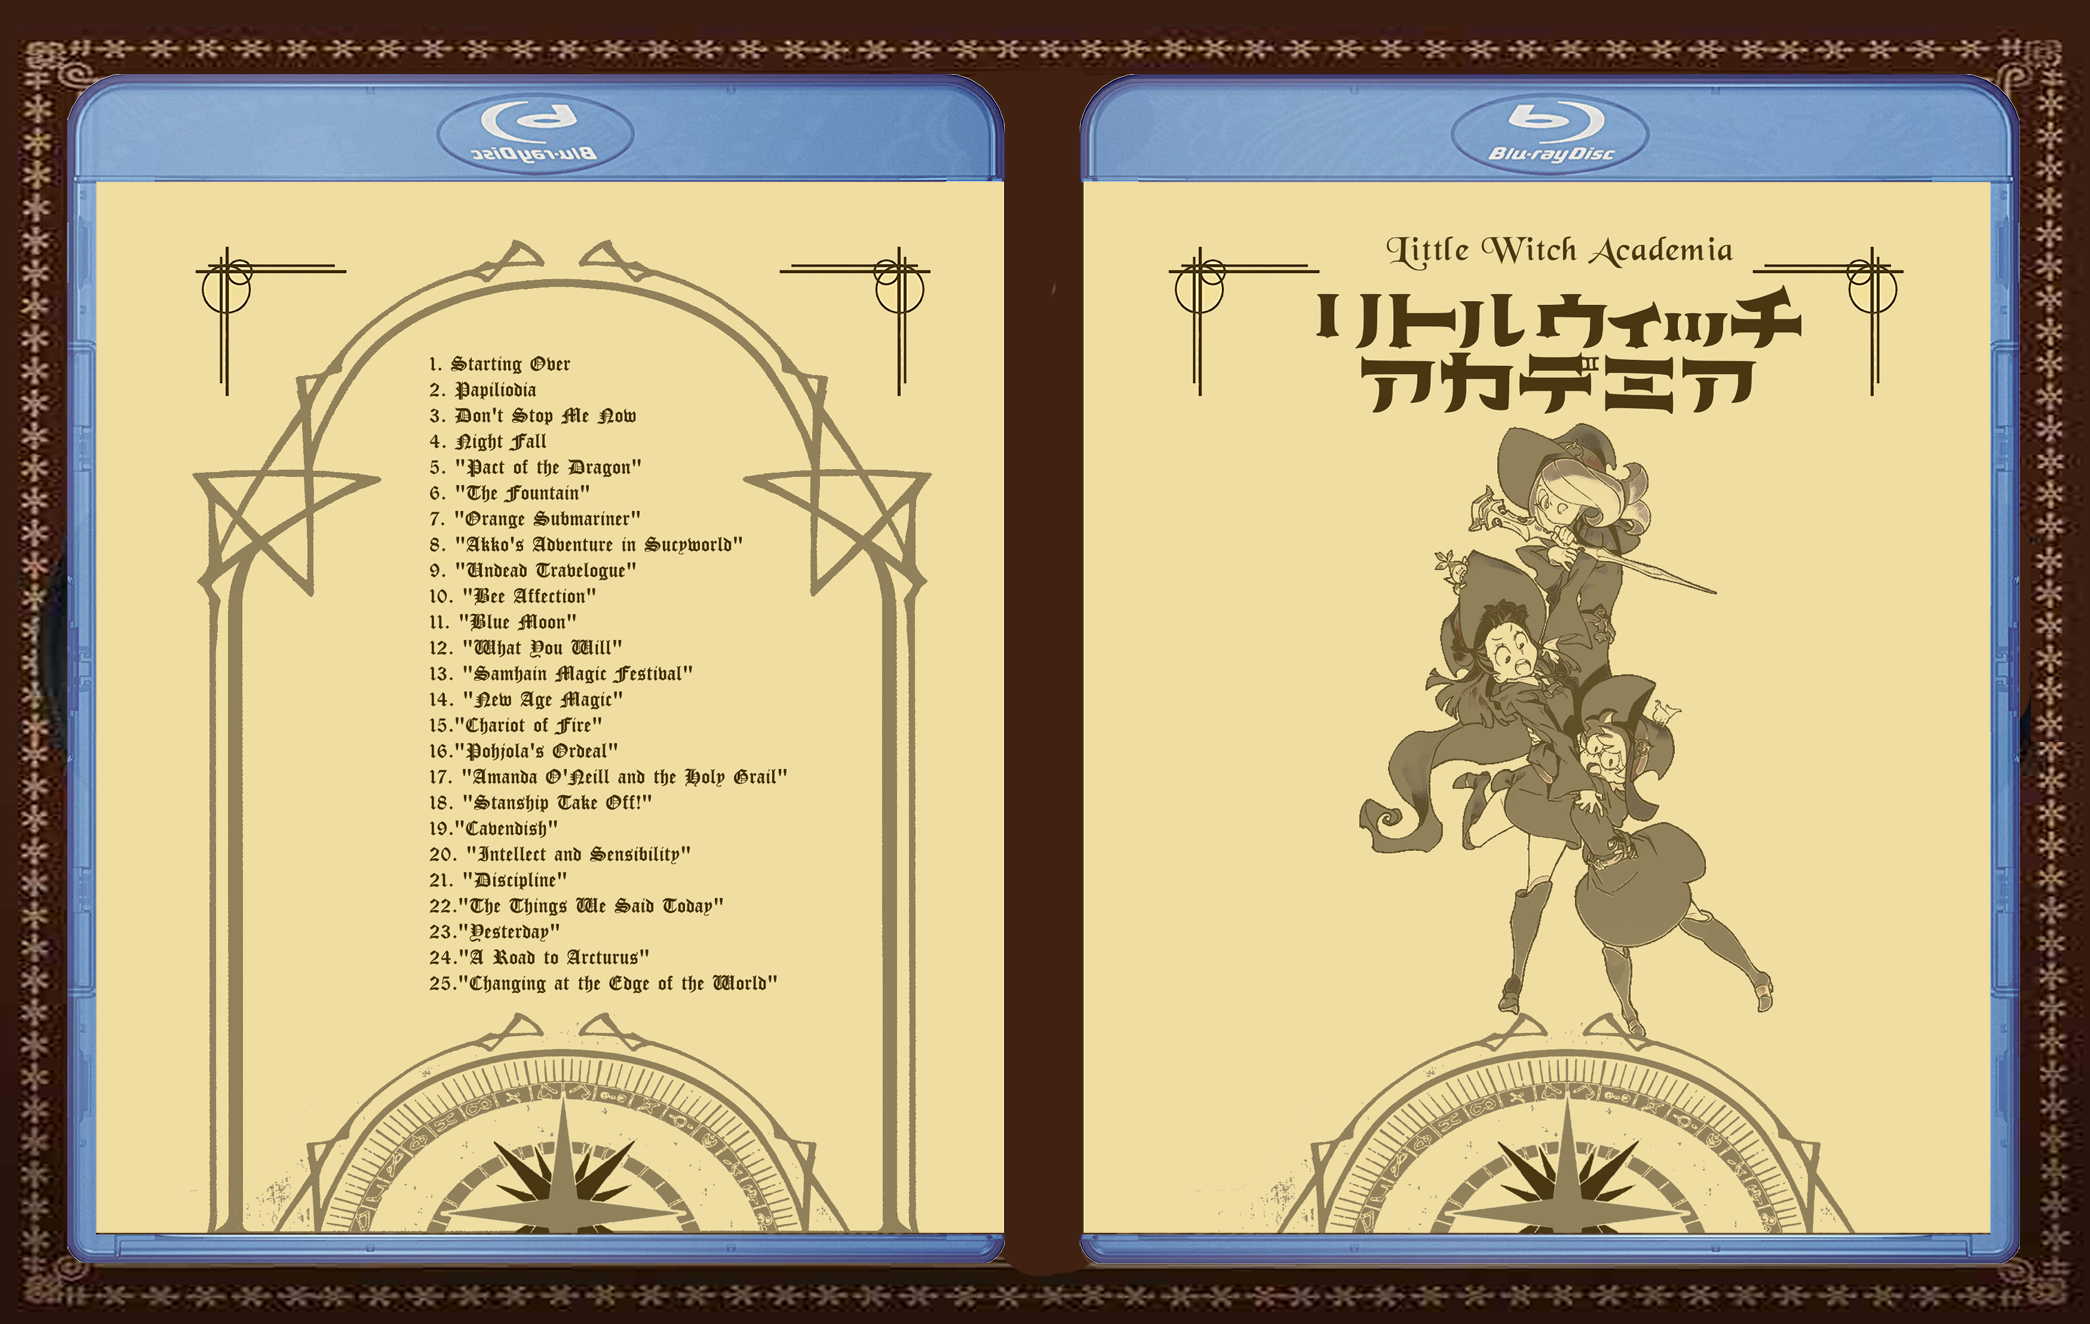 Little Witch Academia box cover